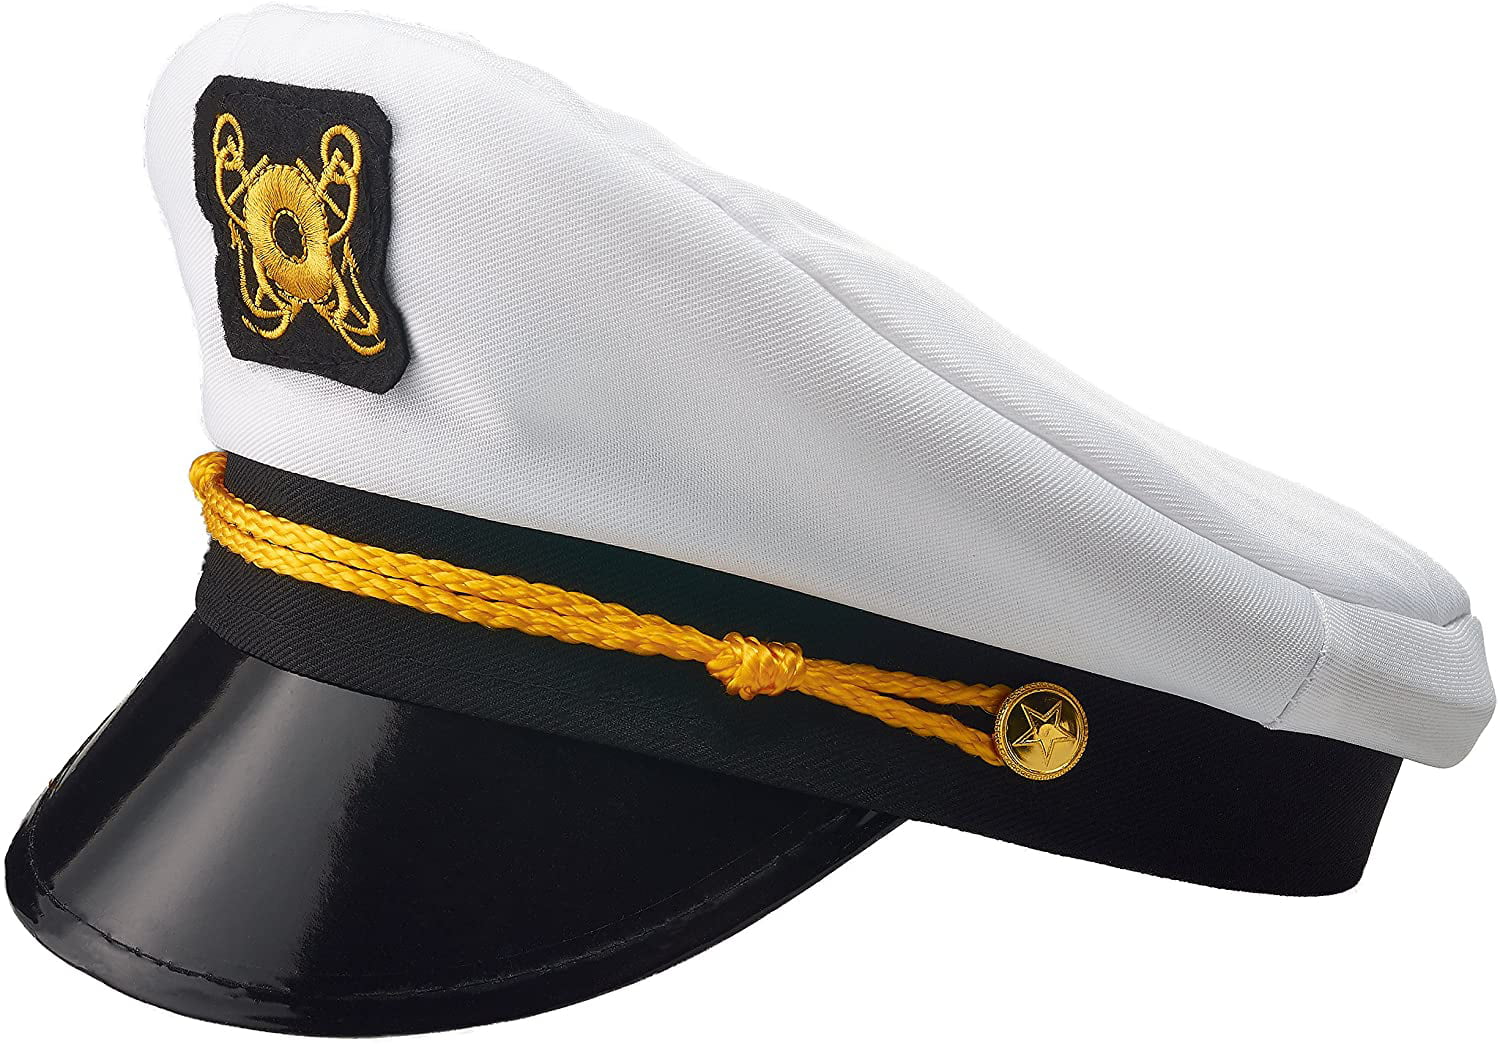 Sailor Ship Yacht Boat Captain Hat Navy Marines Admiral Cap Hat White Gold